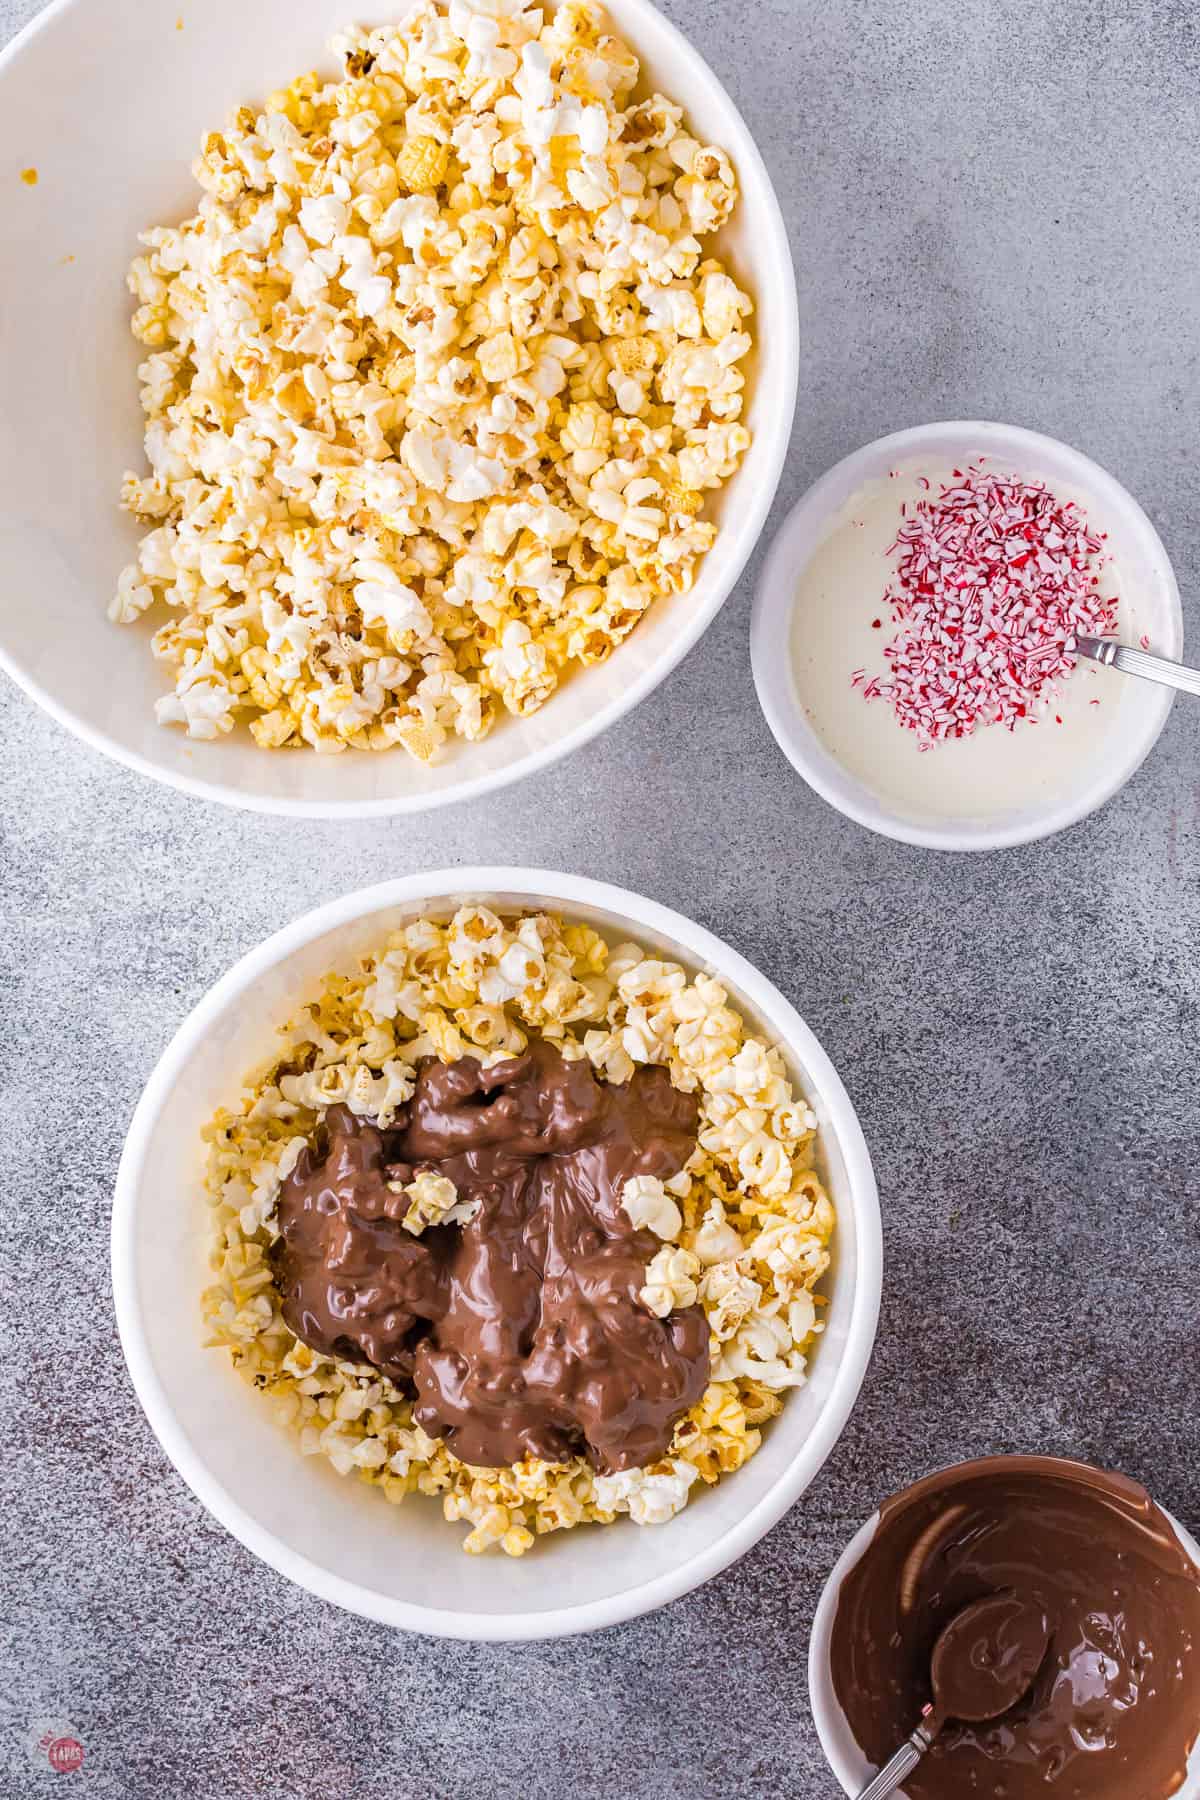 melted chocolate on popcorn